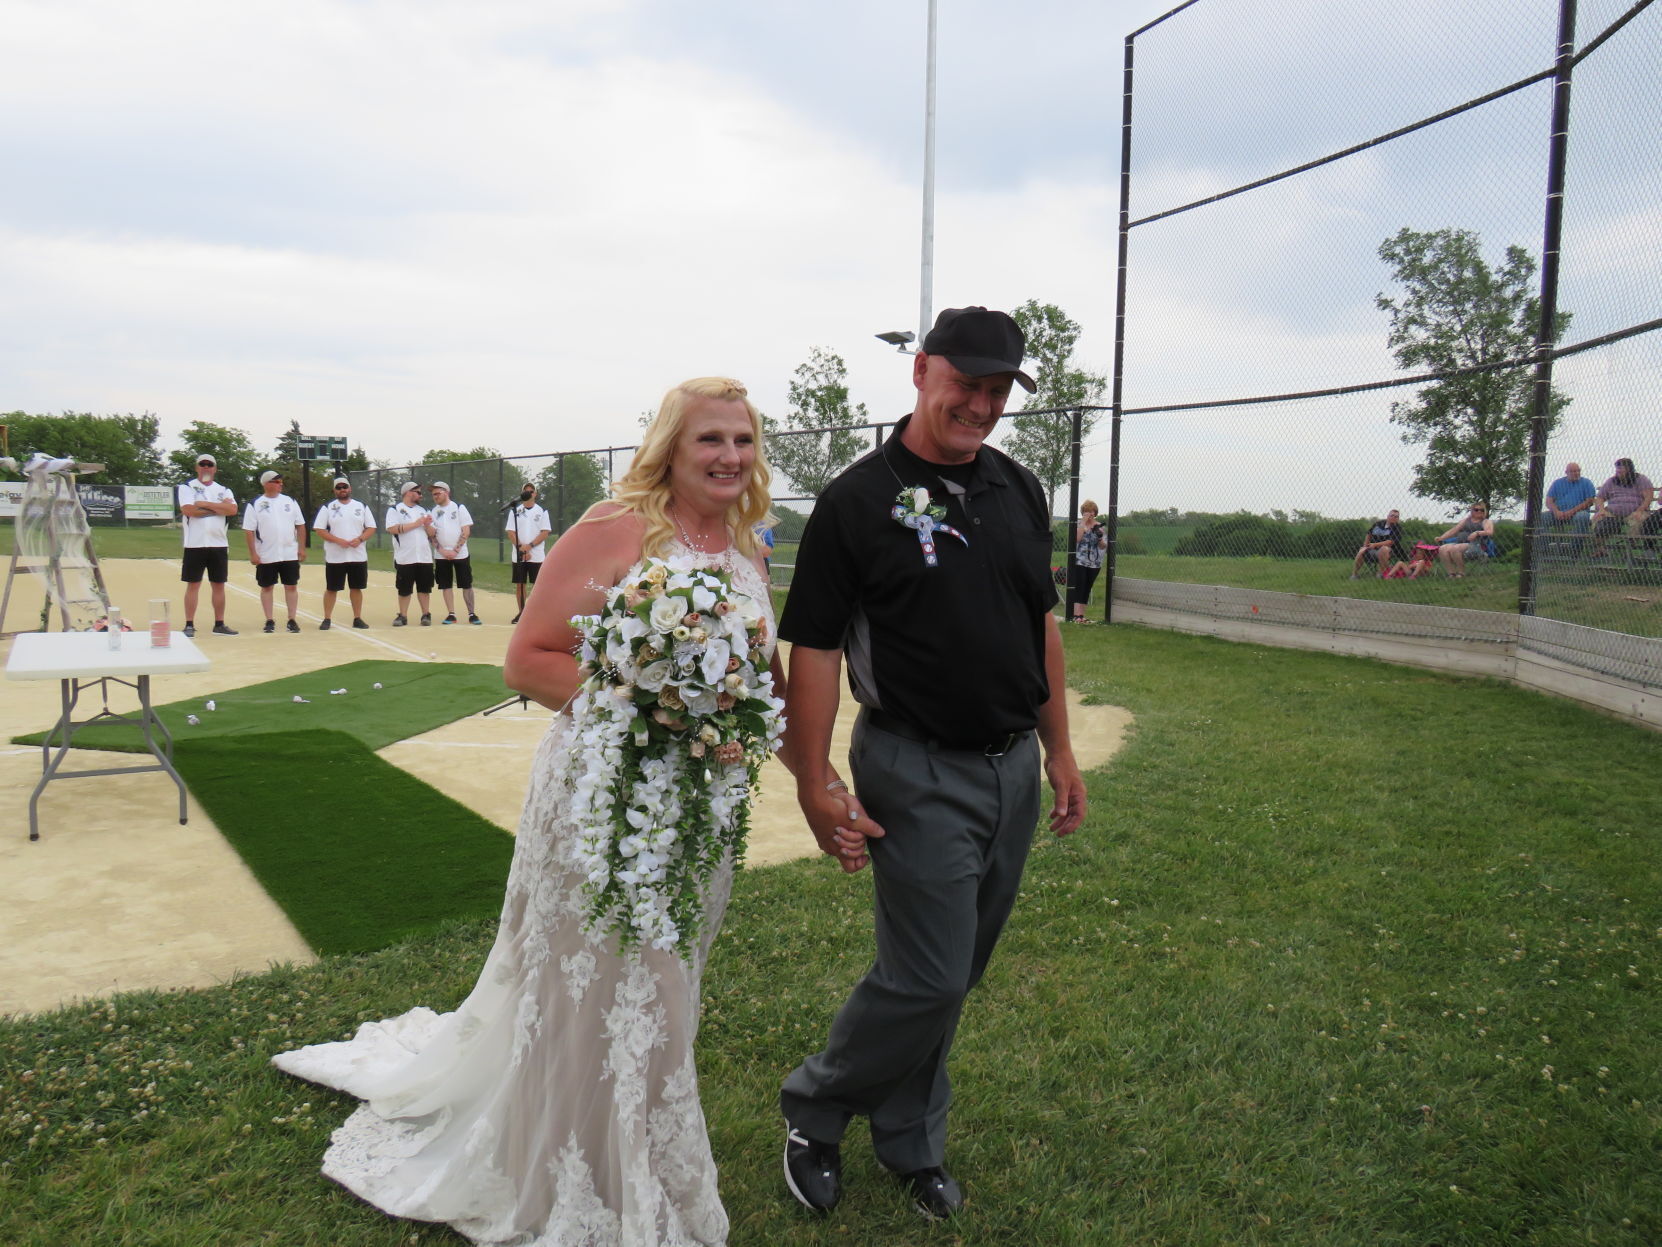 Beatrice couple marries in baseball-themed wedding